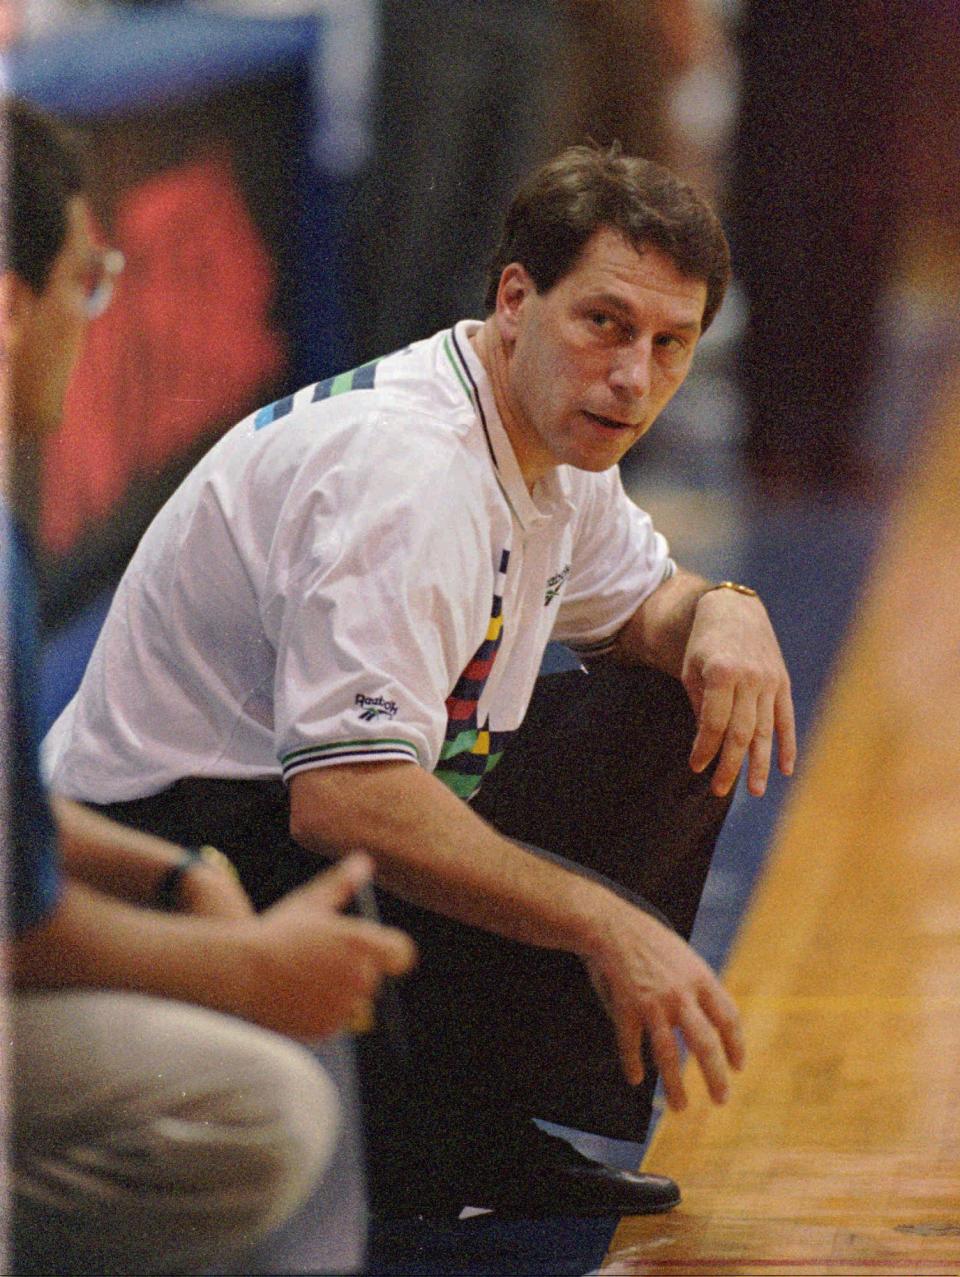 Tom Izzo needed a missed 3-pointer by Chaminade to get Win No. 1 in Maul, back on Nov. 20, 1995.  Now in his 24th season at MSU, Izzo has 21 NCAA tournament appearances (soon to be 22), seven Final Fours and one NCAA championship.